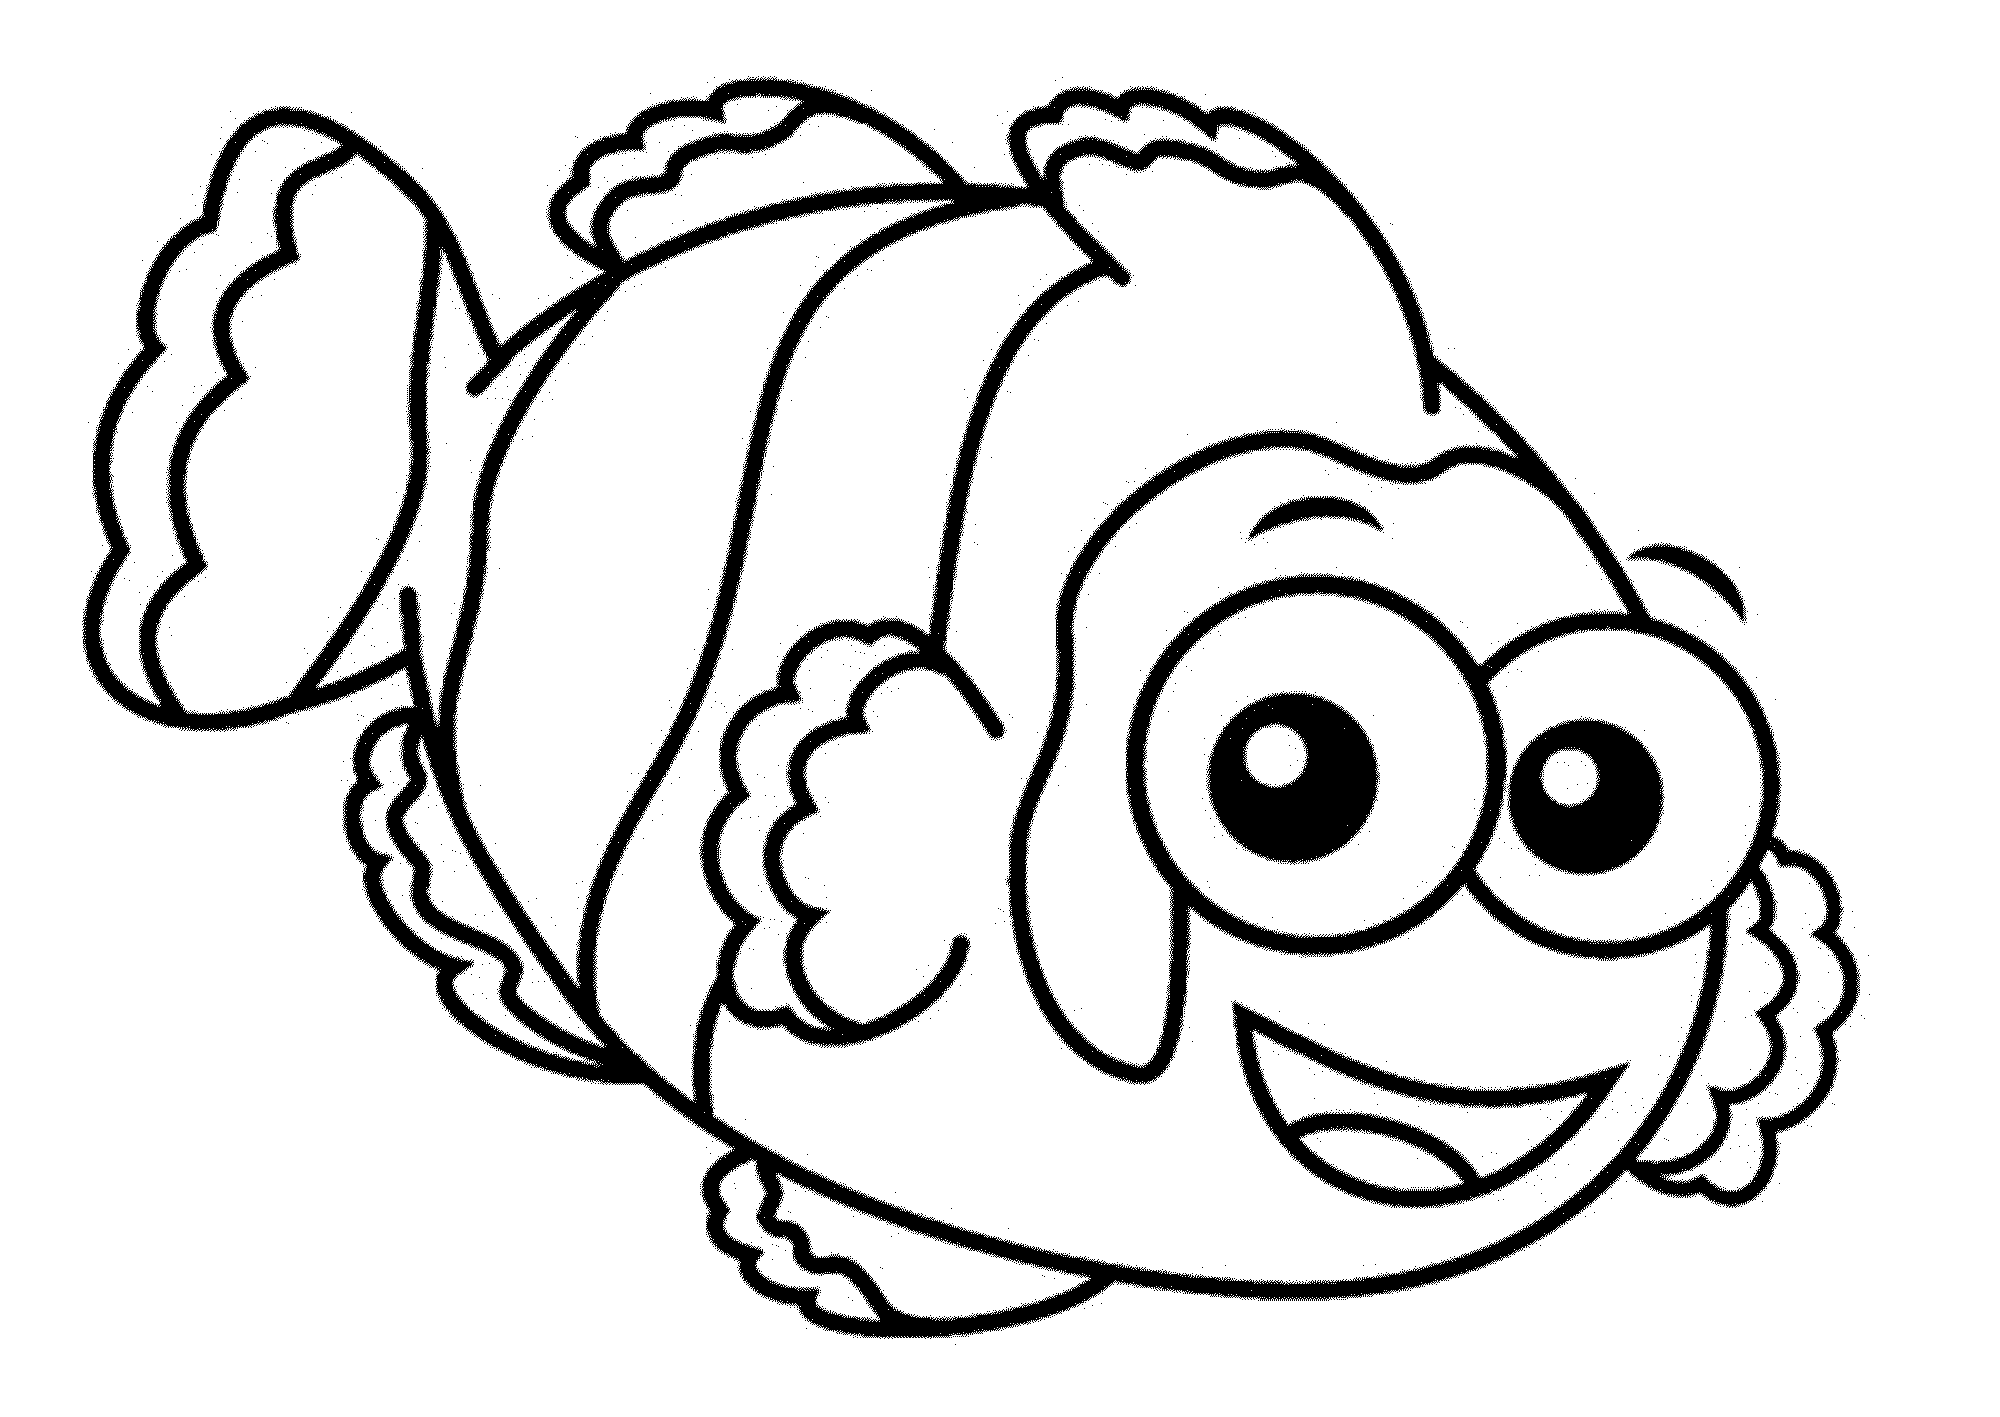 picture of fish to color fish coloring pages getcoloringpagescom of fish color to picture 